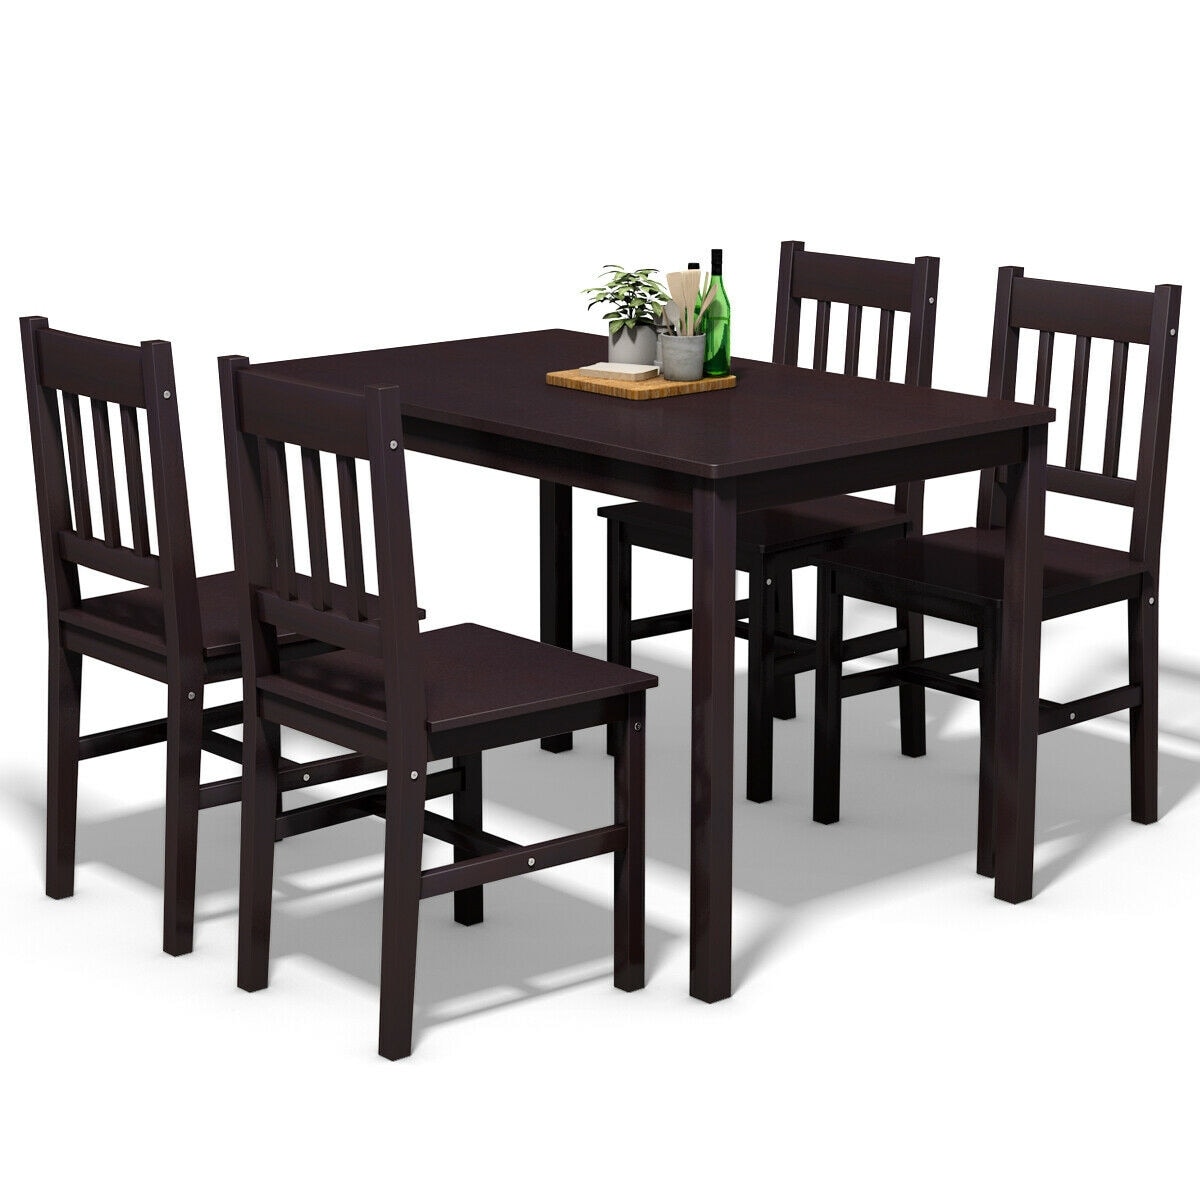 Shop Gymax 5 Piece Dining Table Set 4 Chairs Wood Home Kitchen